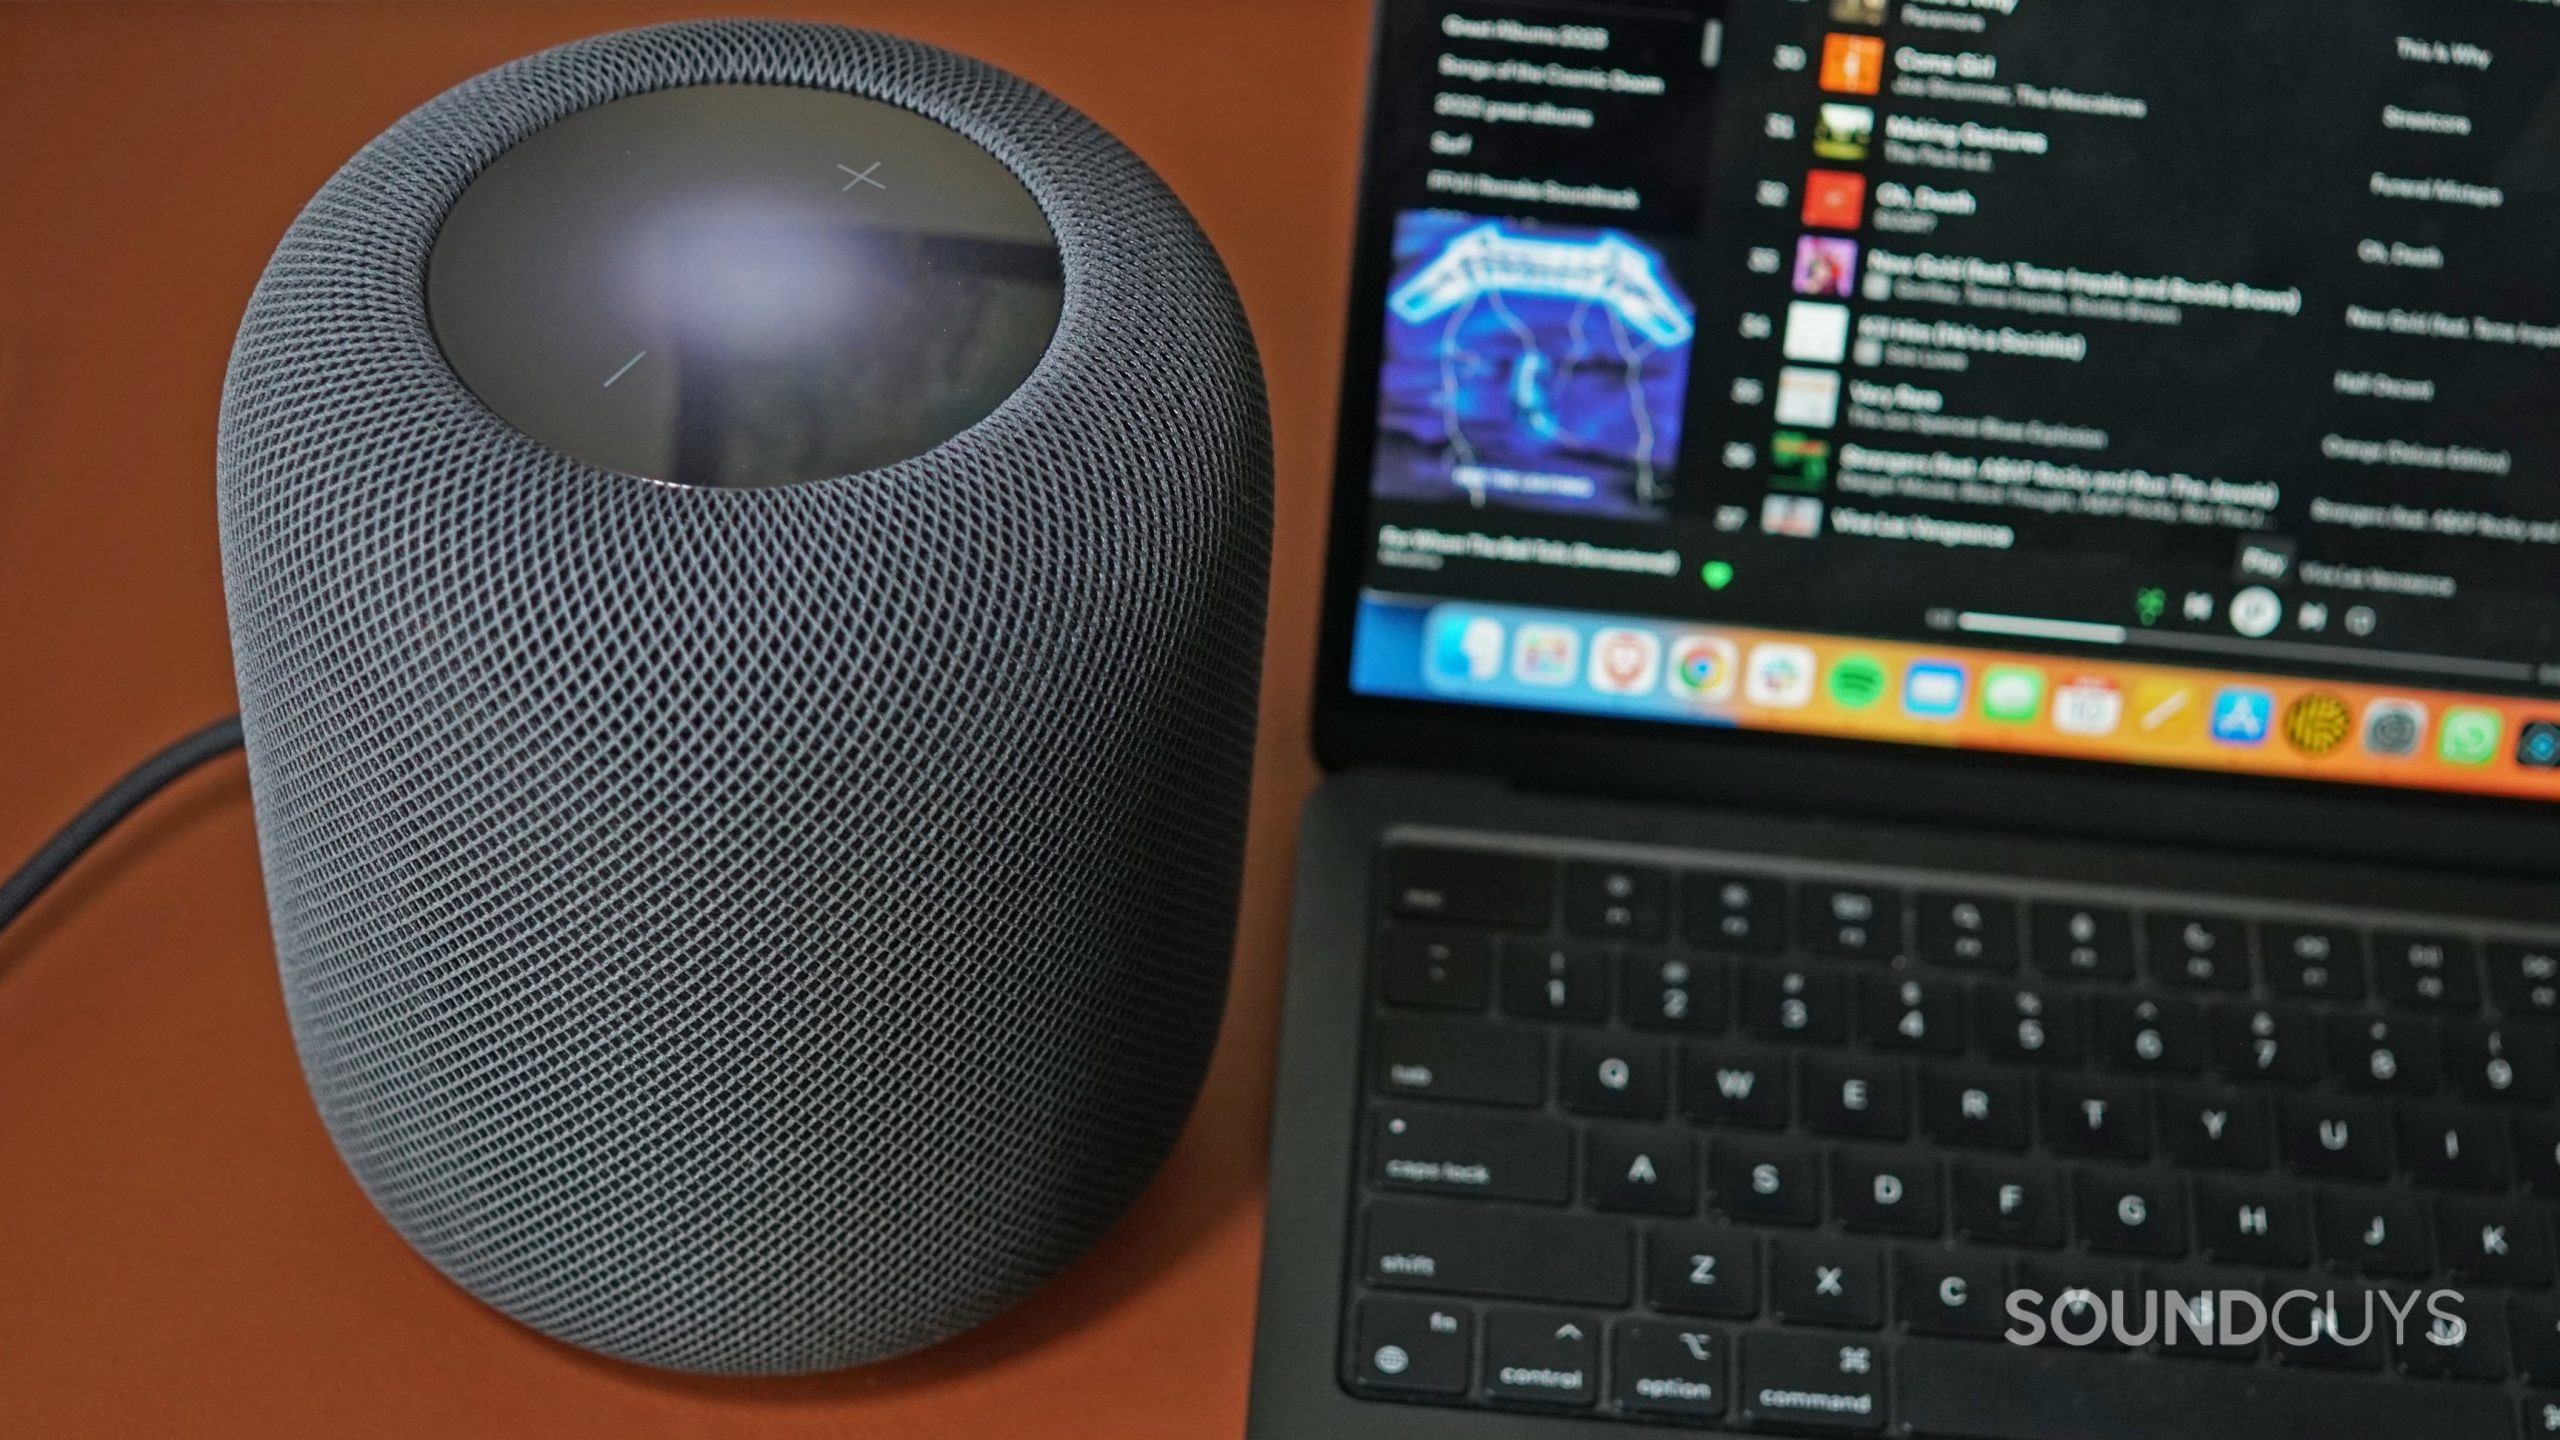 The Apple HomePod (2nd Generation) Sits on a leather surface next to an Apple MacBook Air.